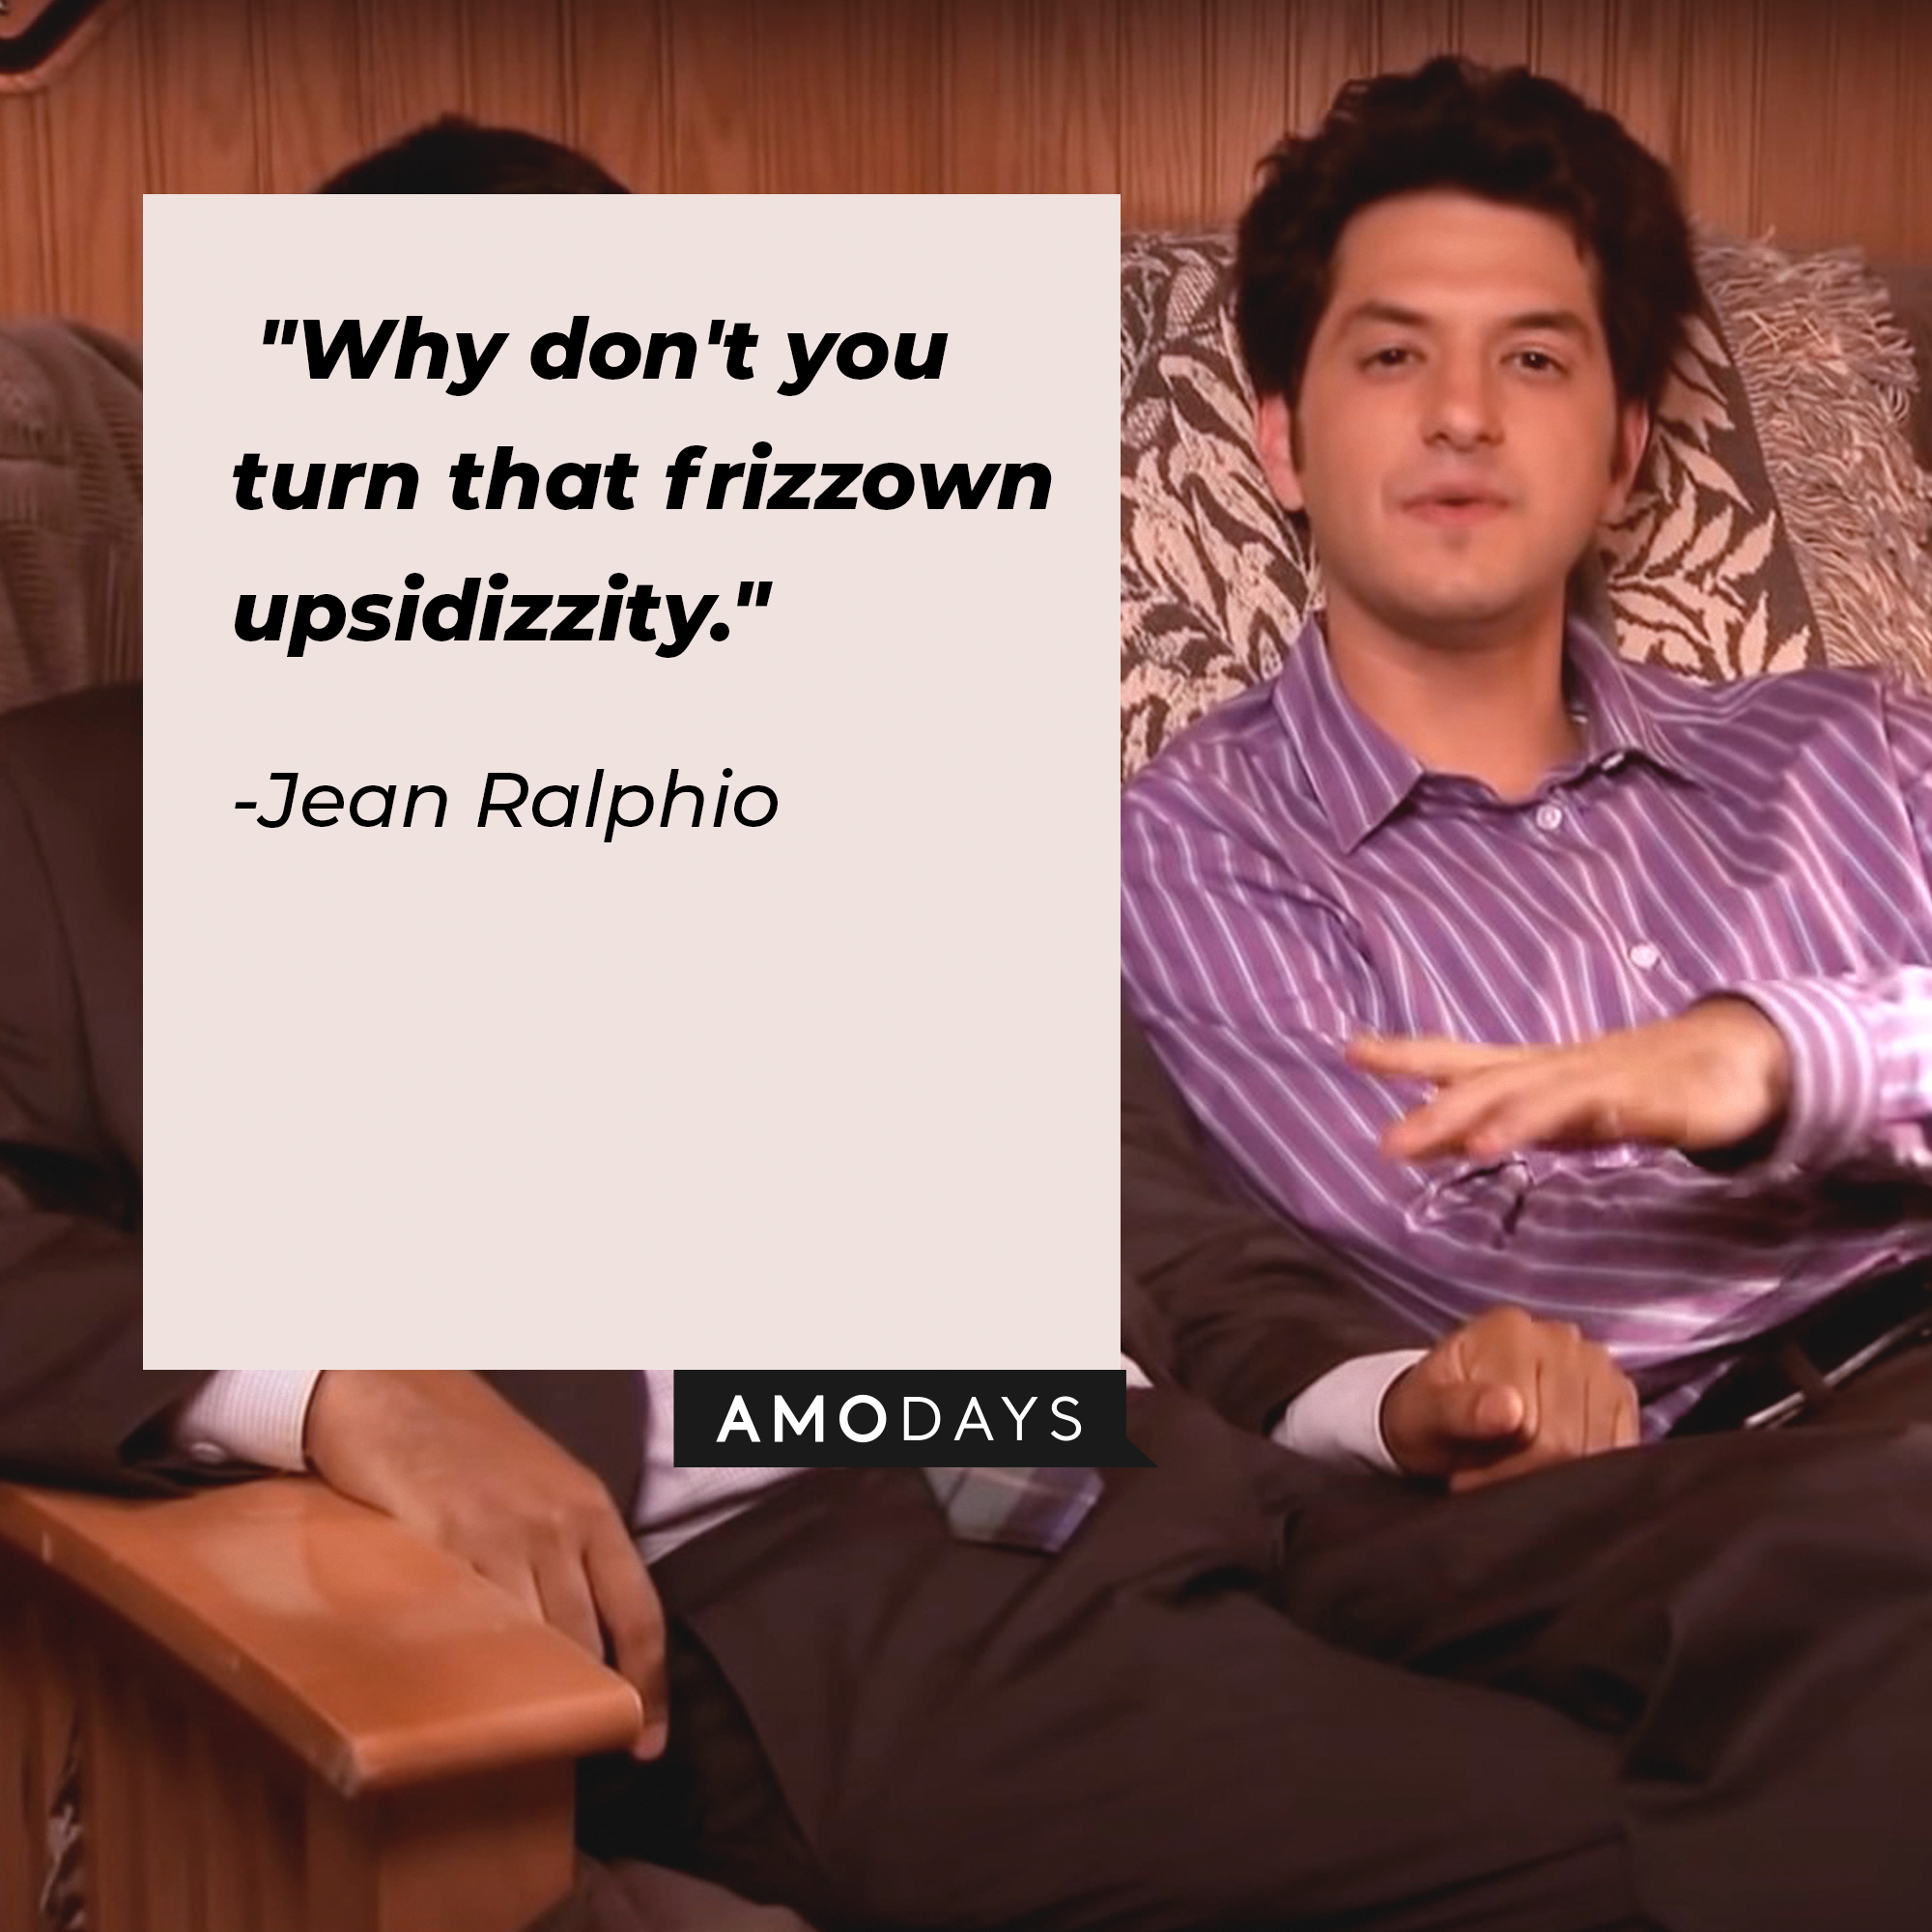 Jean Ralphio's quote: "Why don't you turn that frizzown upsidizzity." | Source: Facebook.com/parksandrecreation